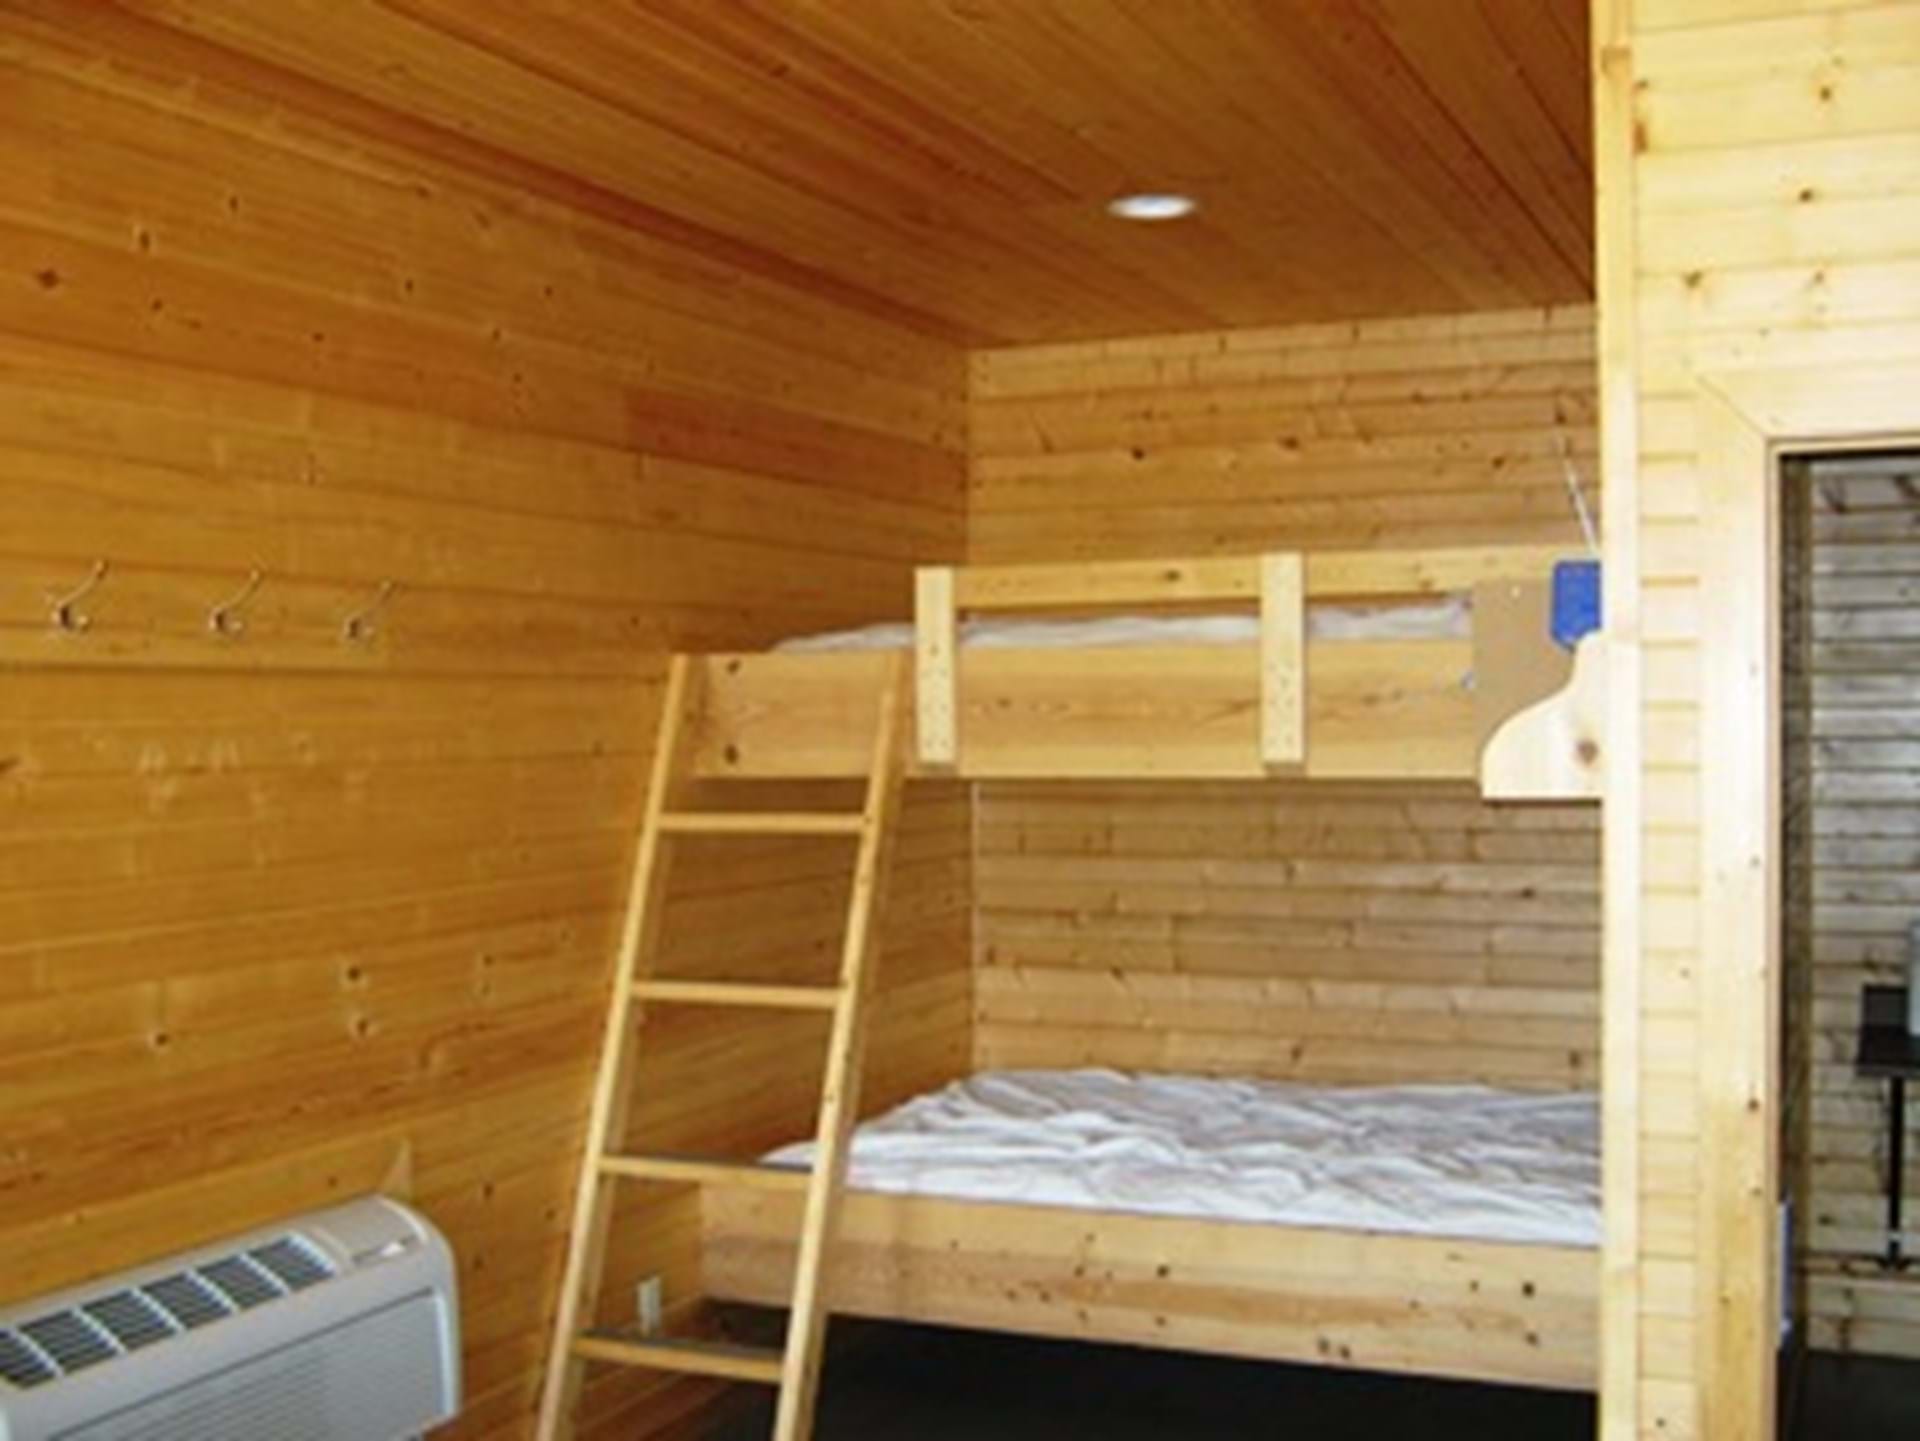 Beds in small cabins